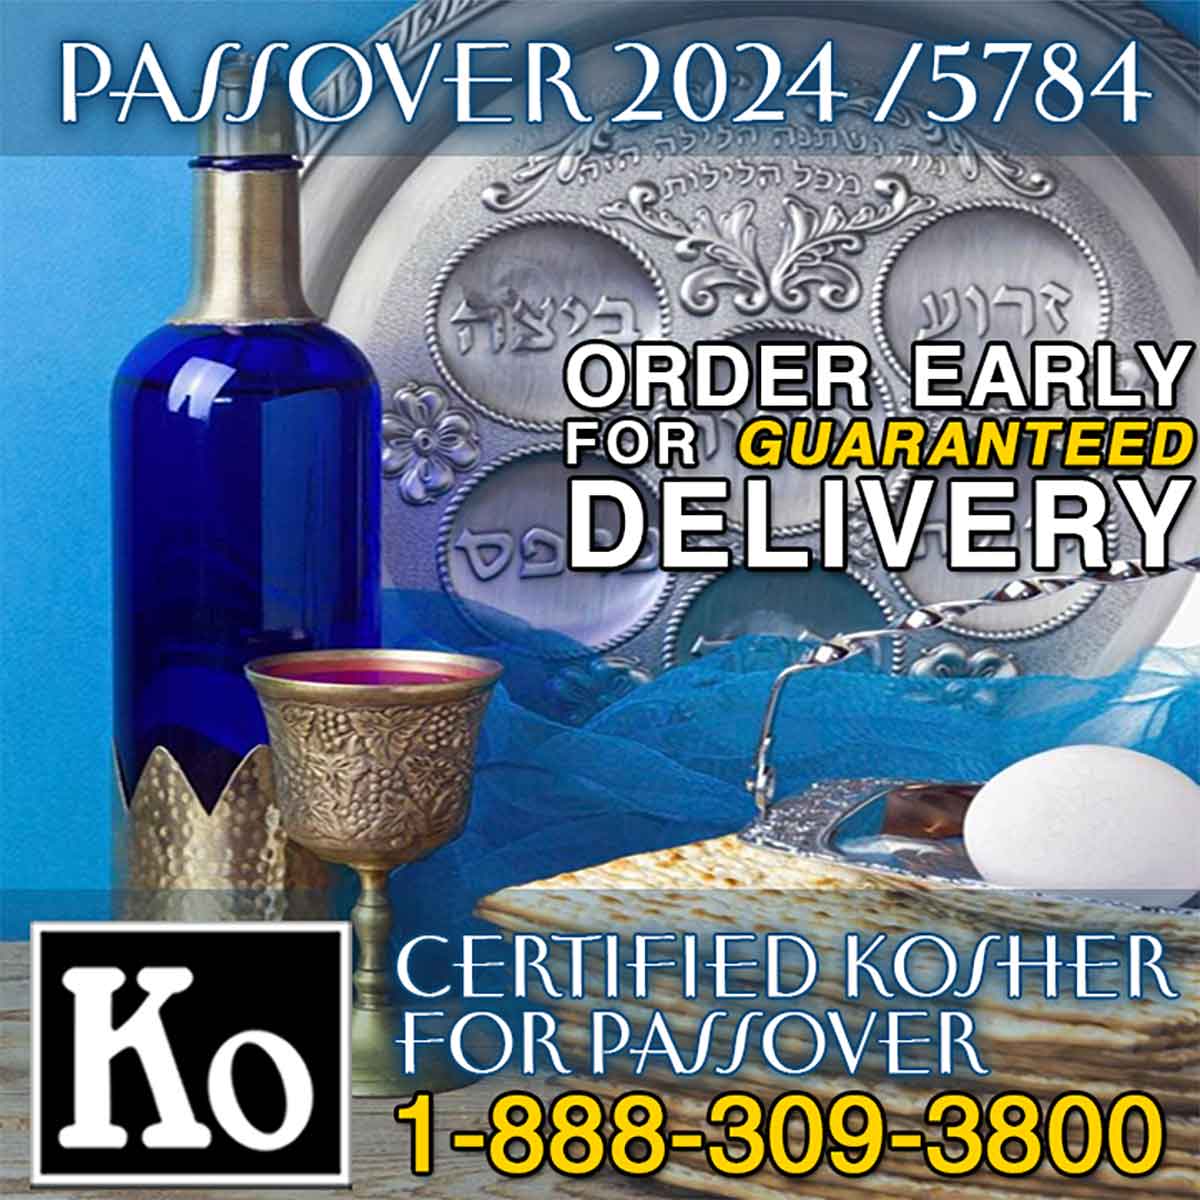 Kosher Thanksgiving Catering Cherry Hill New Jersey 08003